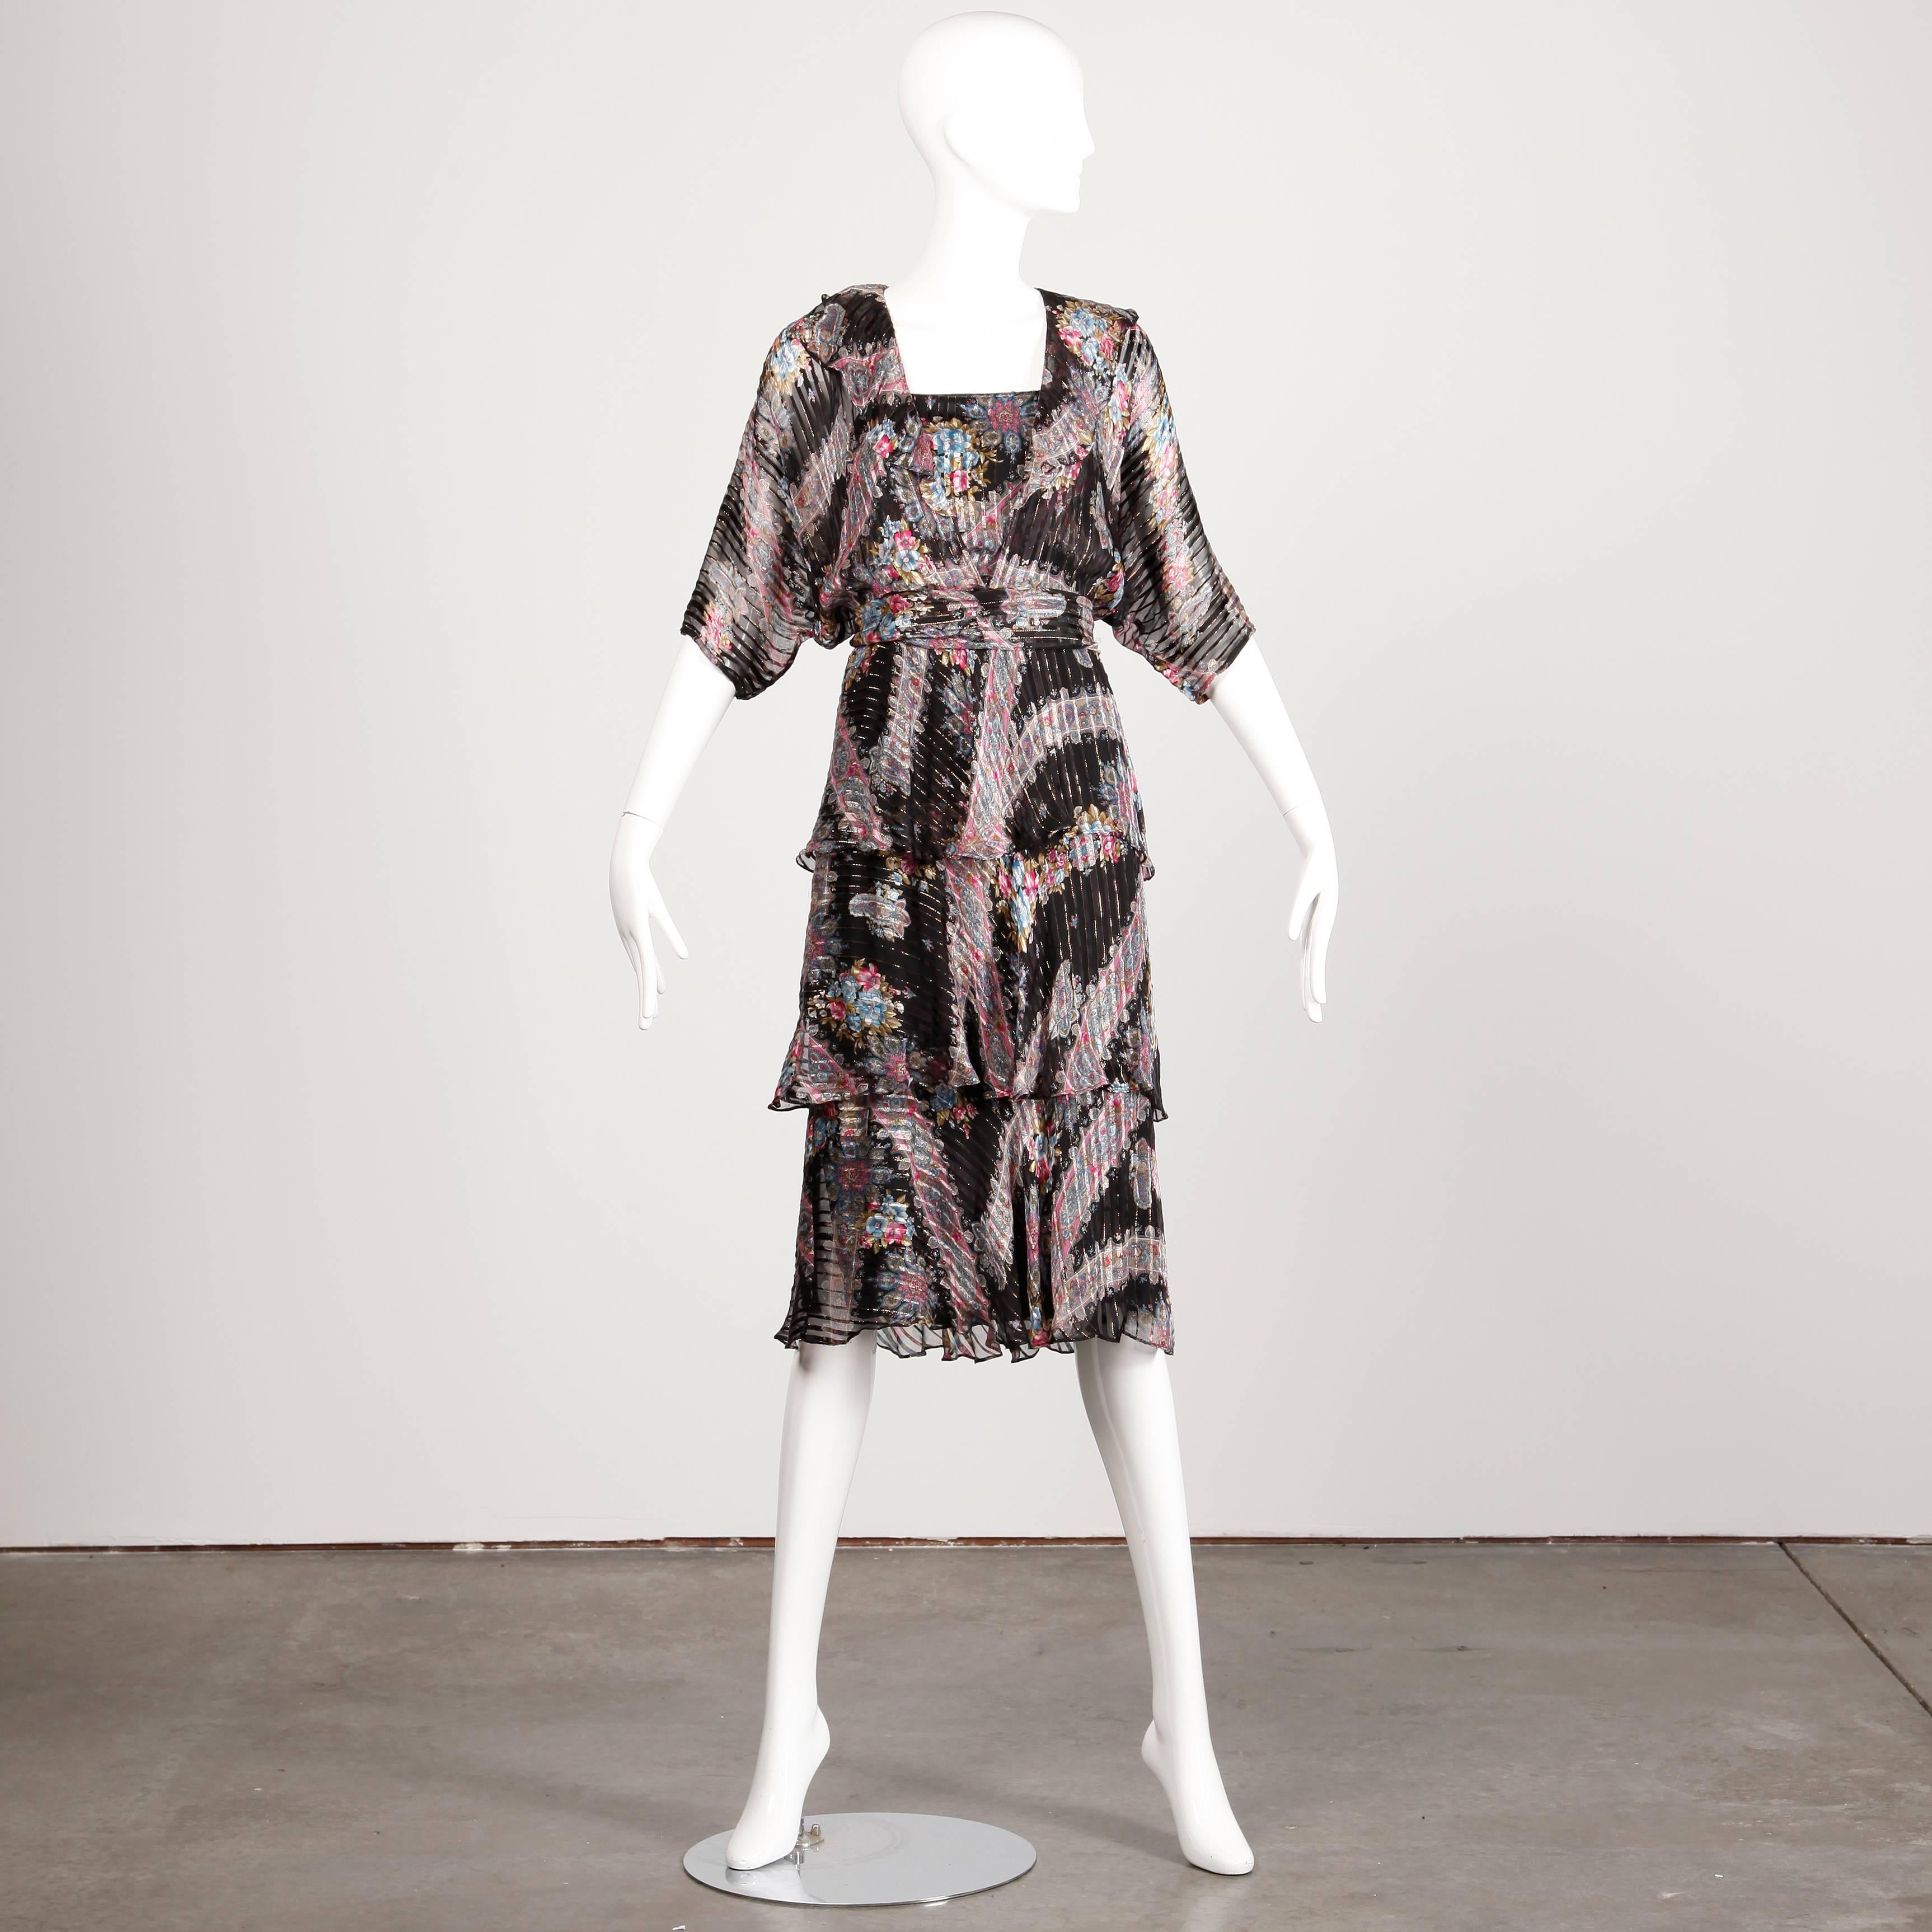 Stunning metallic flecked paper thin silk dress with a paisley print by The Silk Farm by Icinoo. Dolman sleeves and matching sash. The dress is a marked size 4 and fits like a modern size small.

Details: 

Partially Lined
Marked Size: